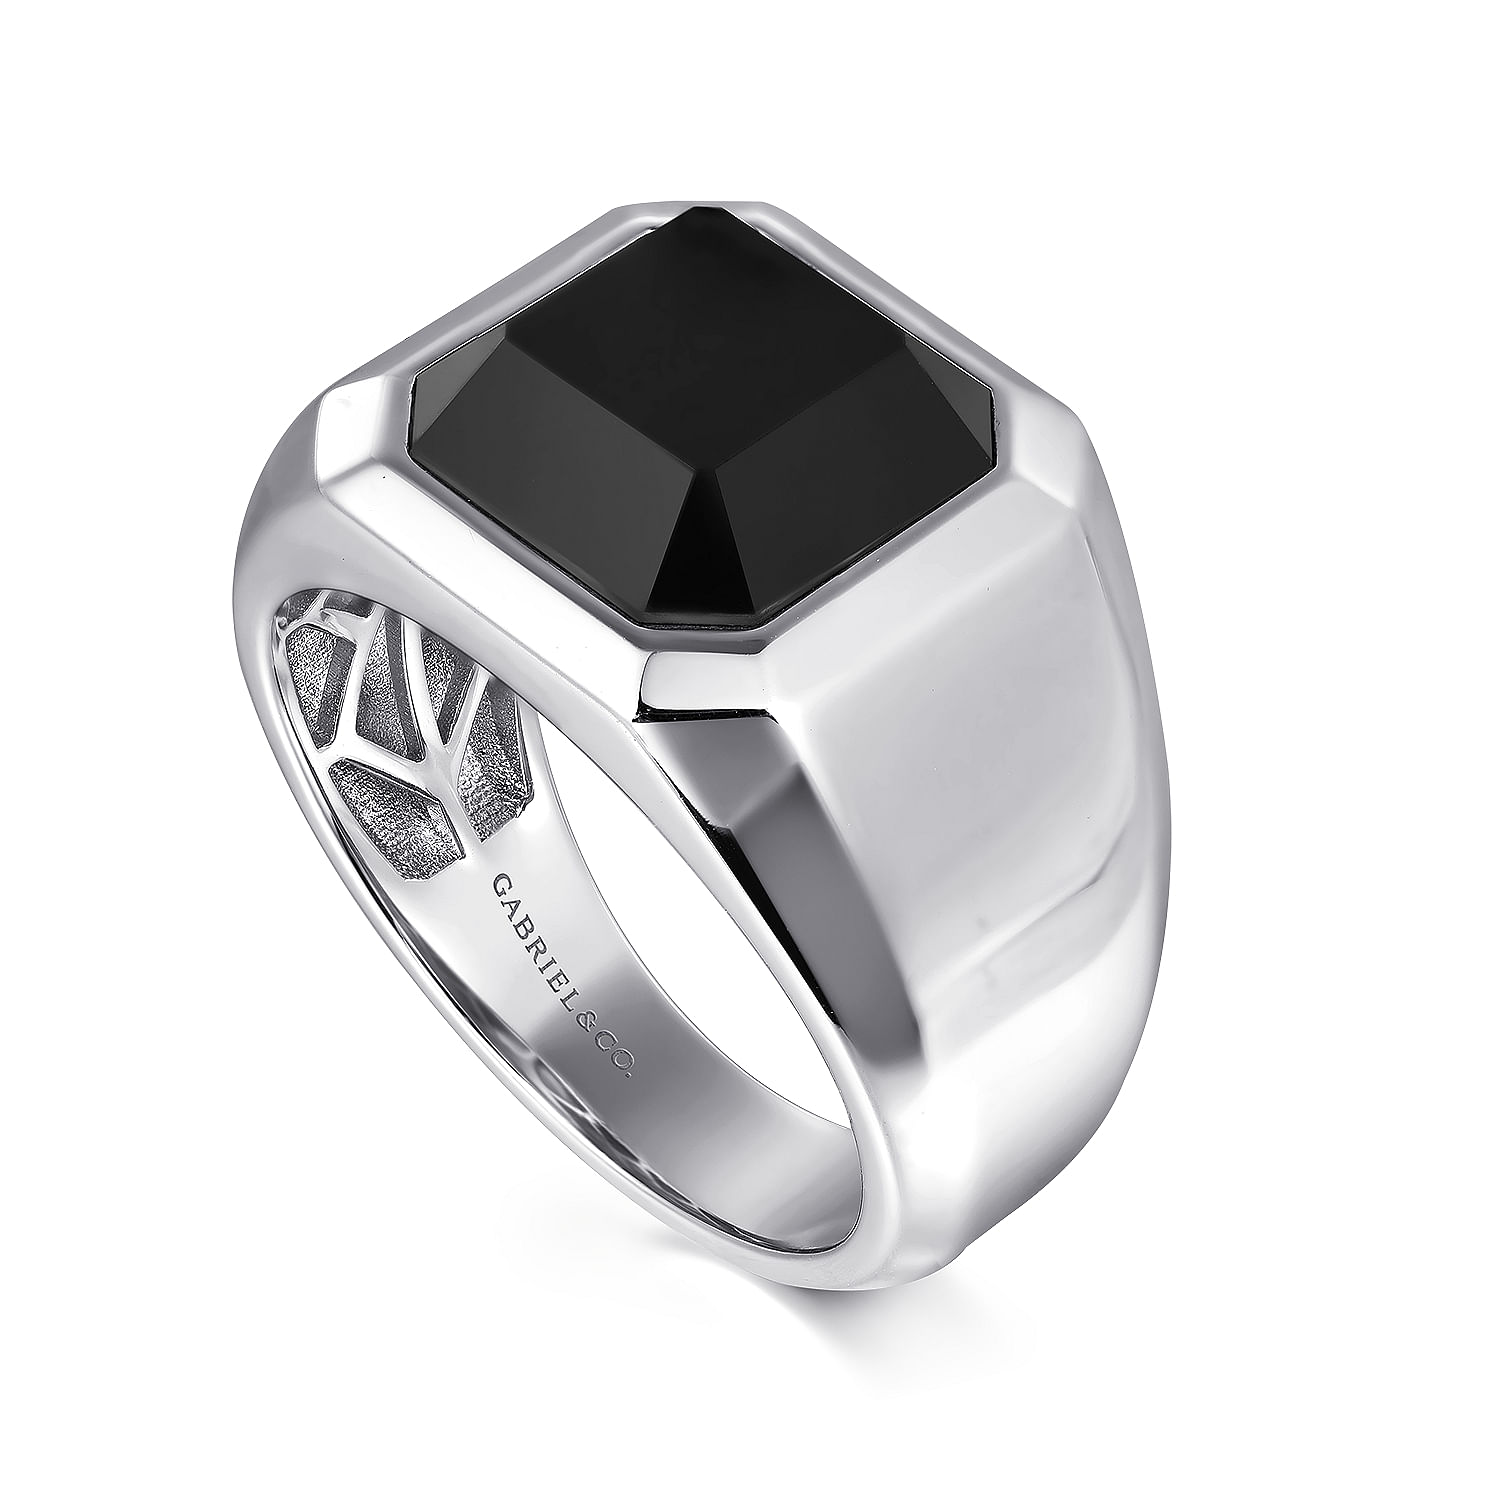 Wide 925 Sterling Silver Signet Ring with Faceted Onyx Stone in Sand Blast Finish